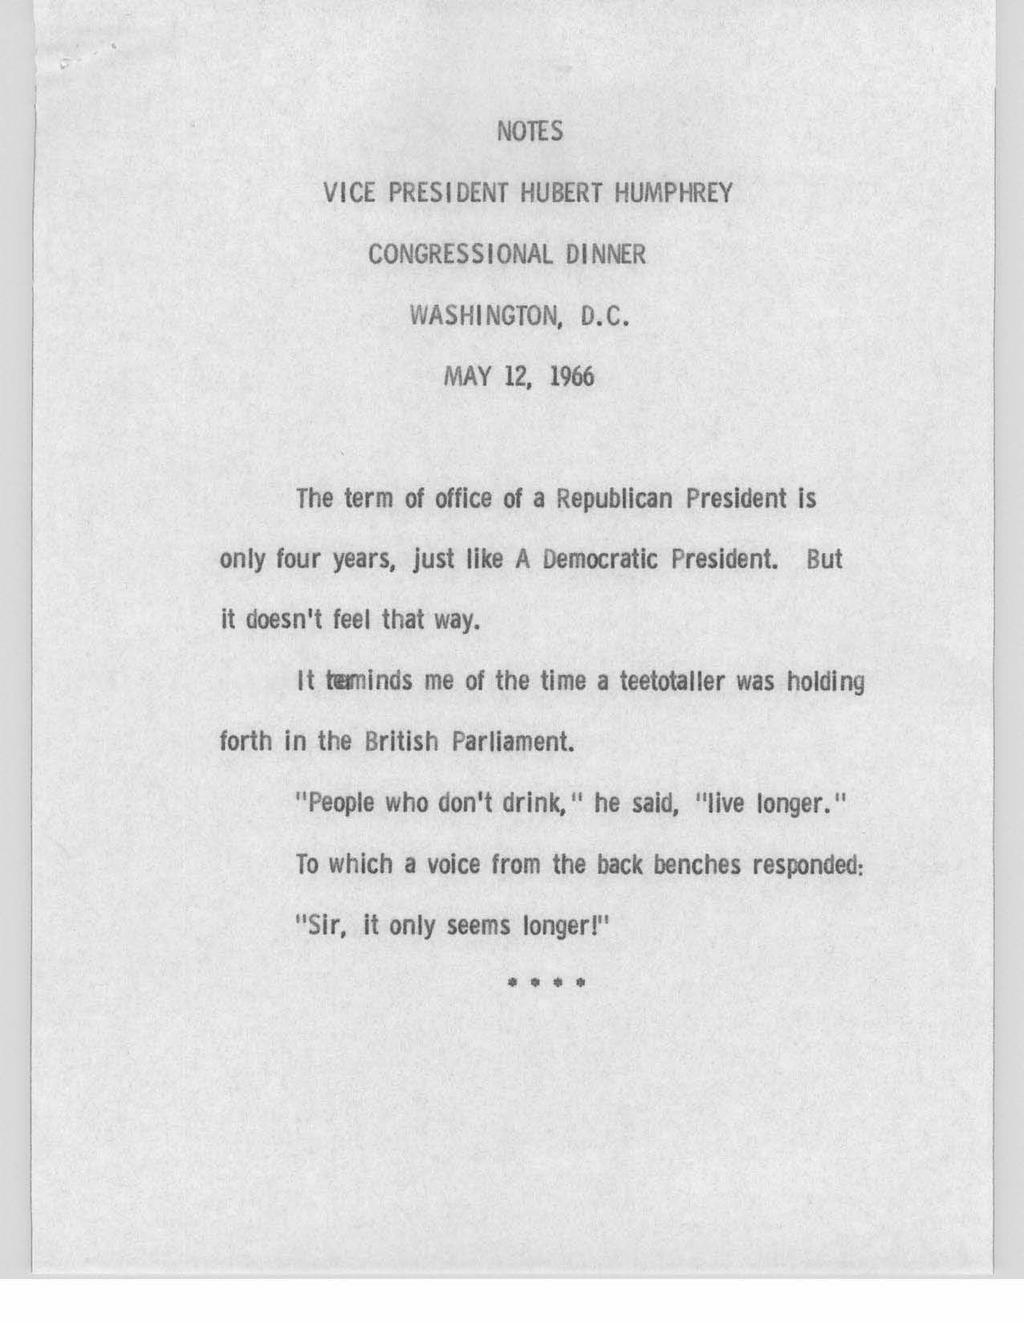 .. NOTES VICE PRES I DENT HUBERT HUMPHREY CONGRESSIONAL 01 NNER WASHINGTON, D. C. MAY 12, 1966 The term of office of a Republican President Is only four years, just like A Democratic President.